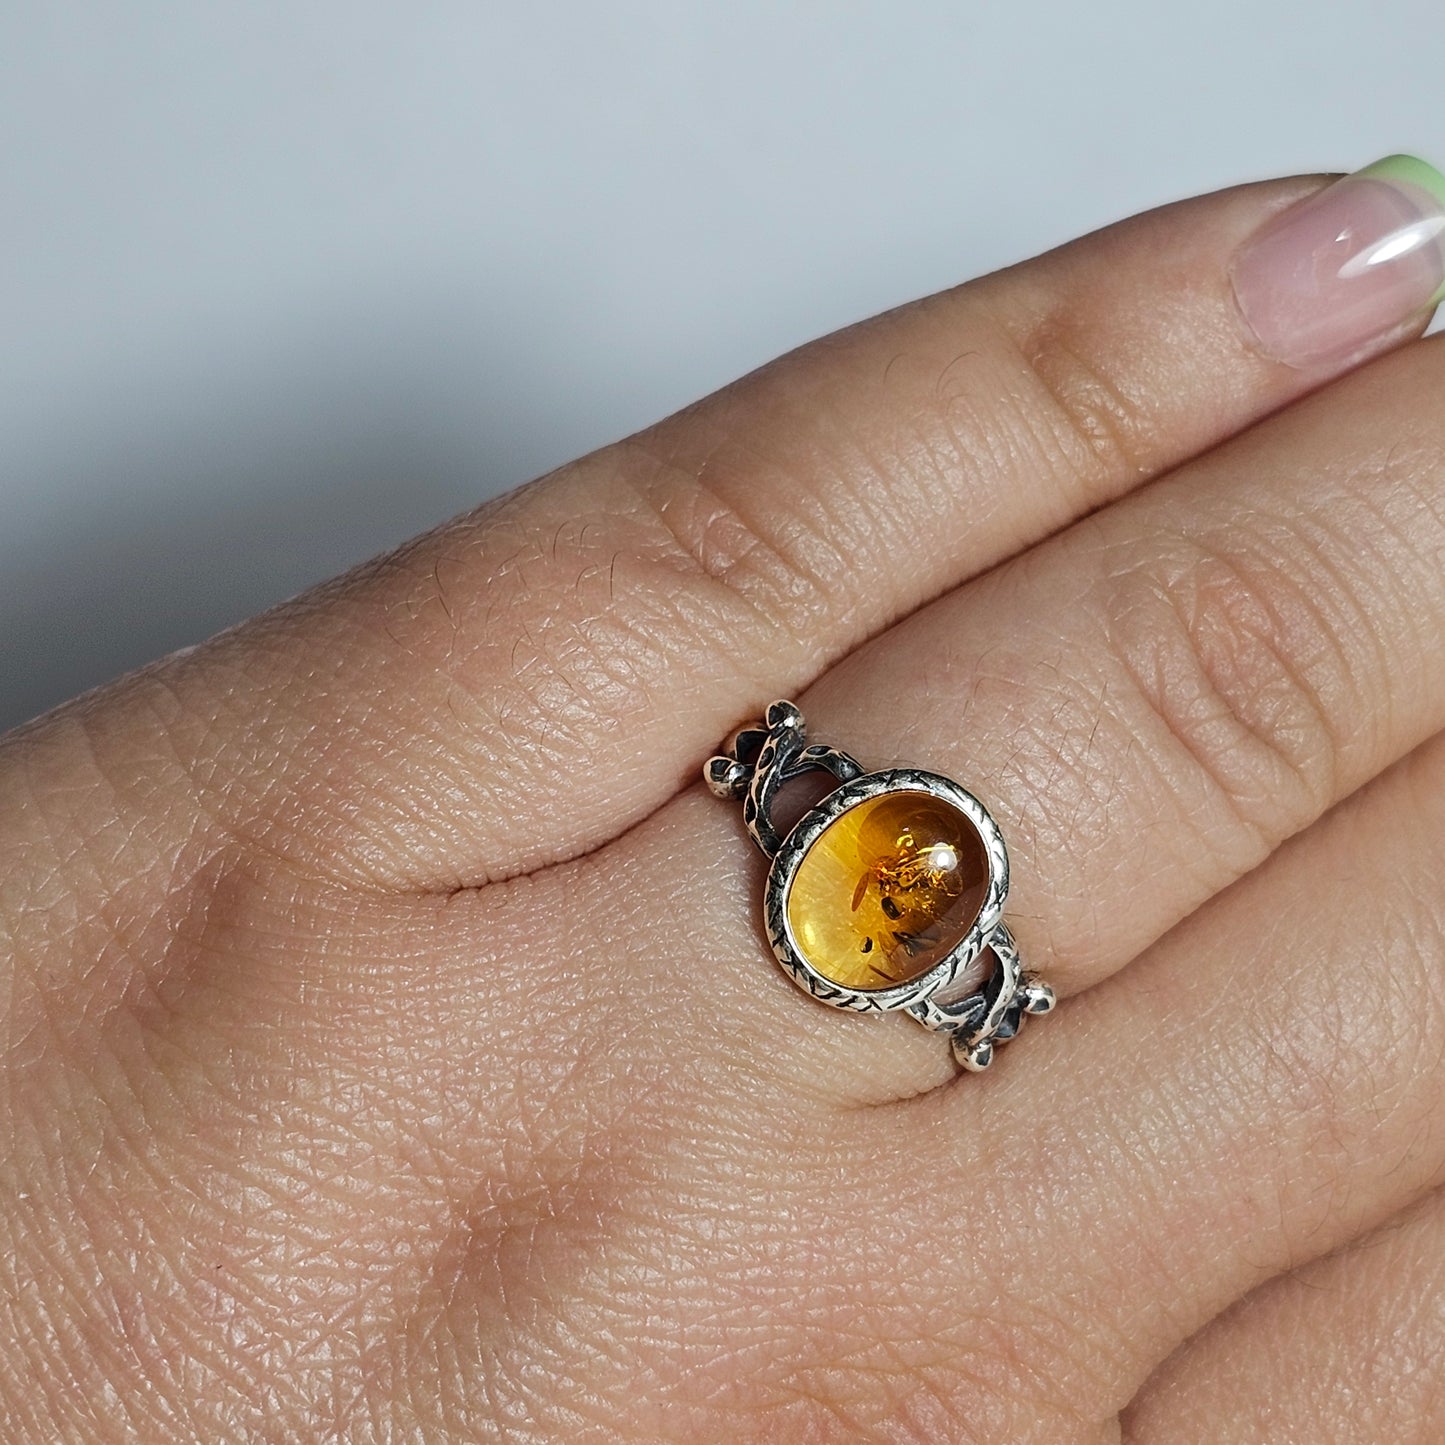 This adjustable ring is crafted from sterling silver and features a beautiful oval shaped light Amber stone with a textured bezel and criss-cross designed shoulders.